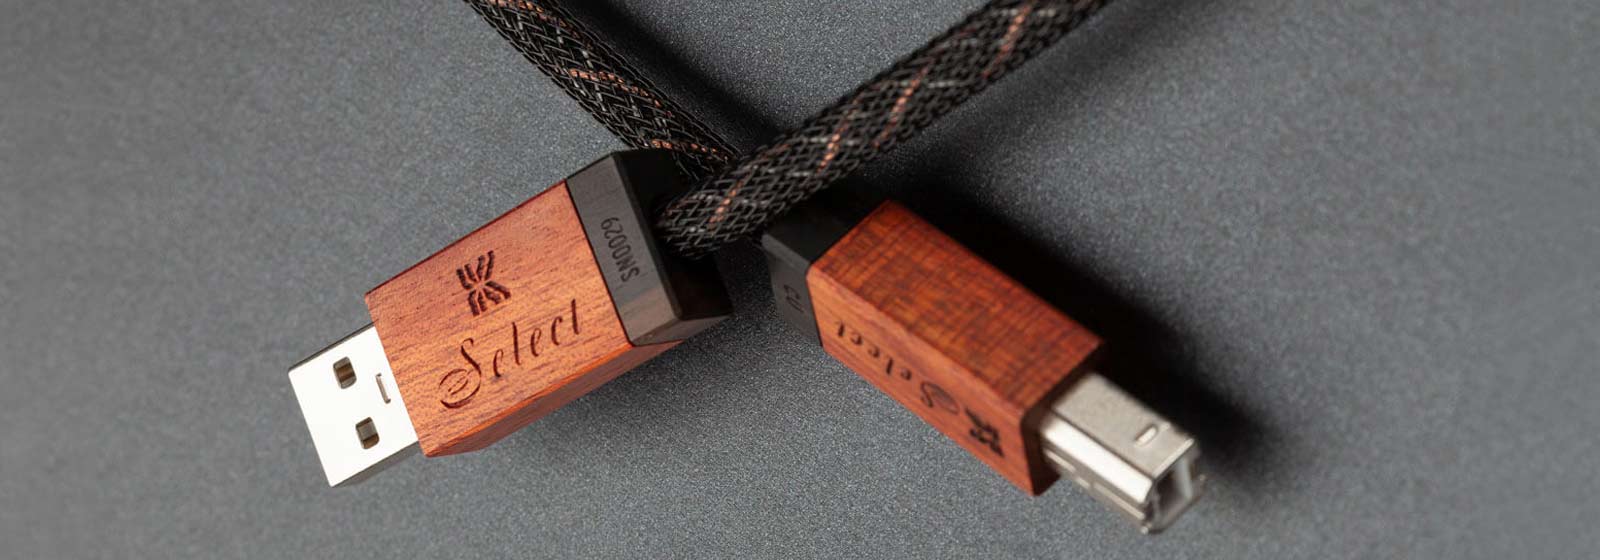 Kimber-USB-cables